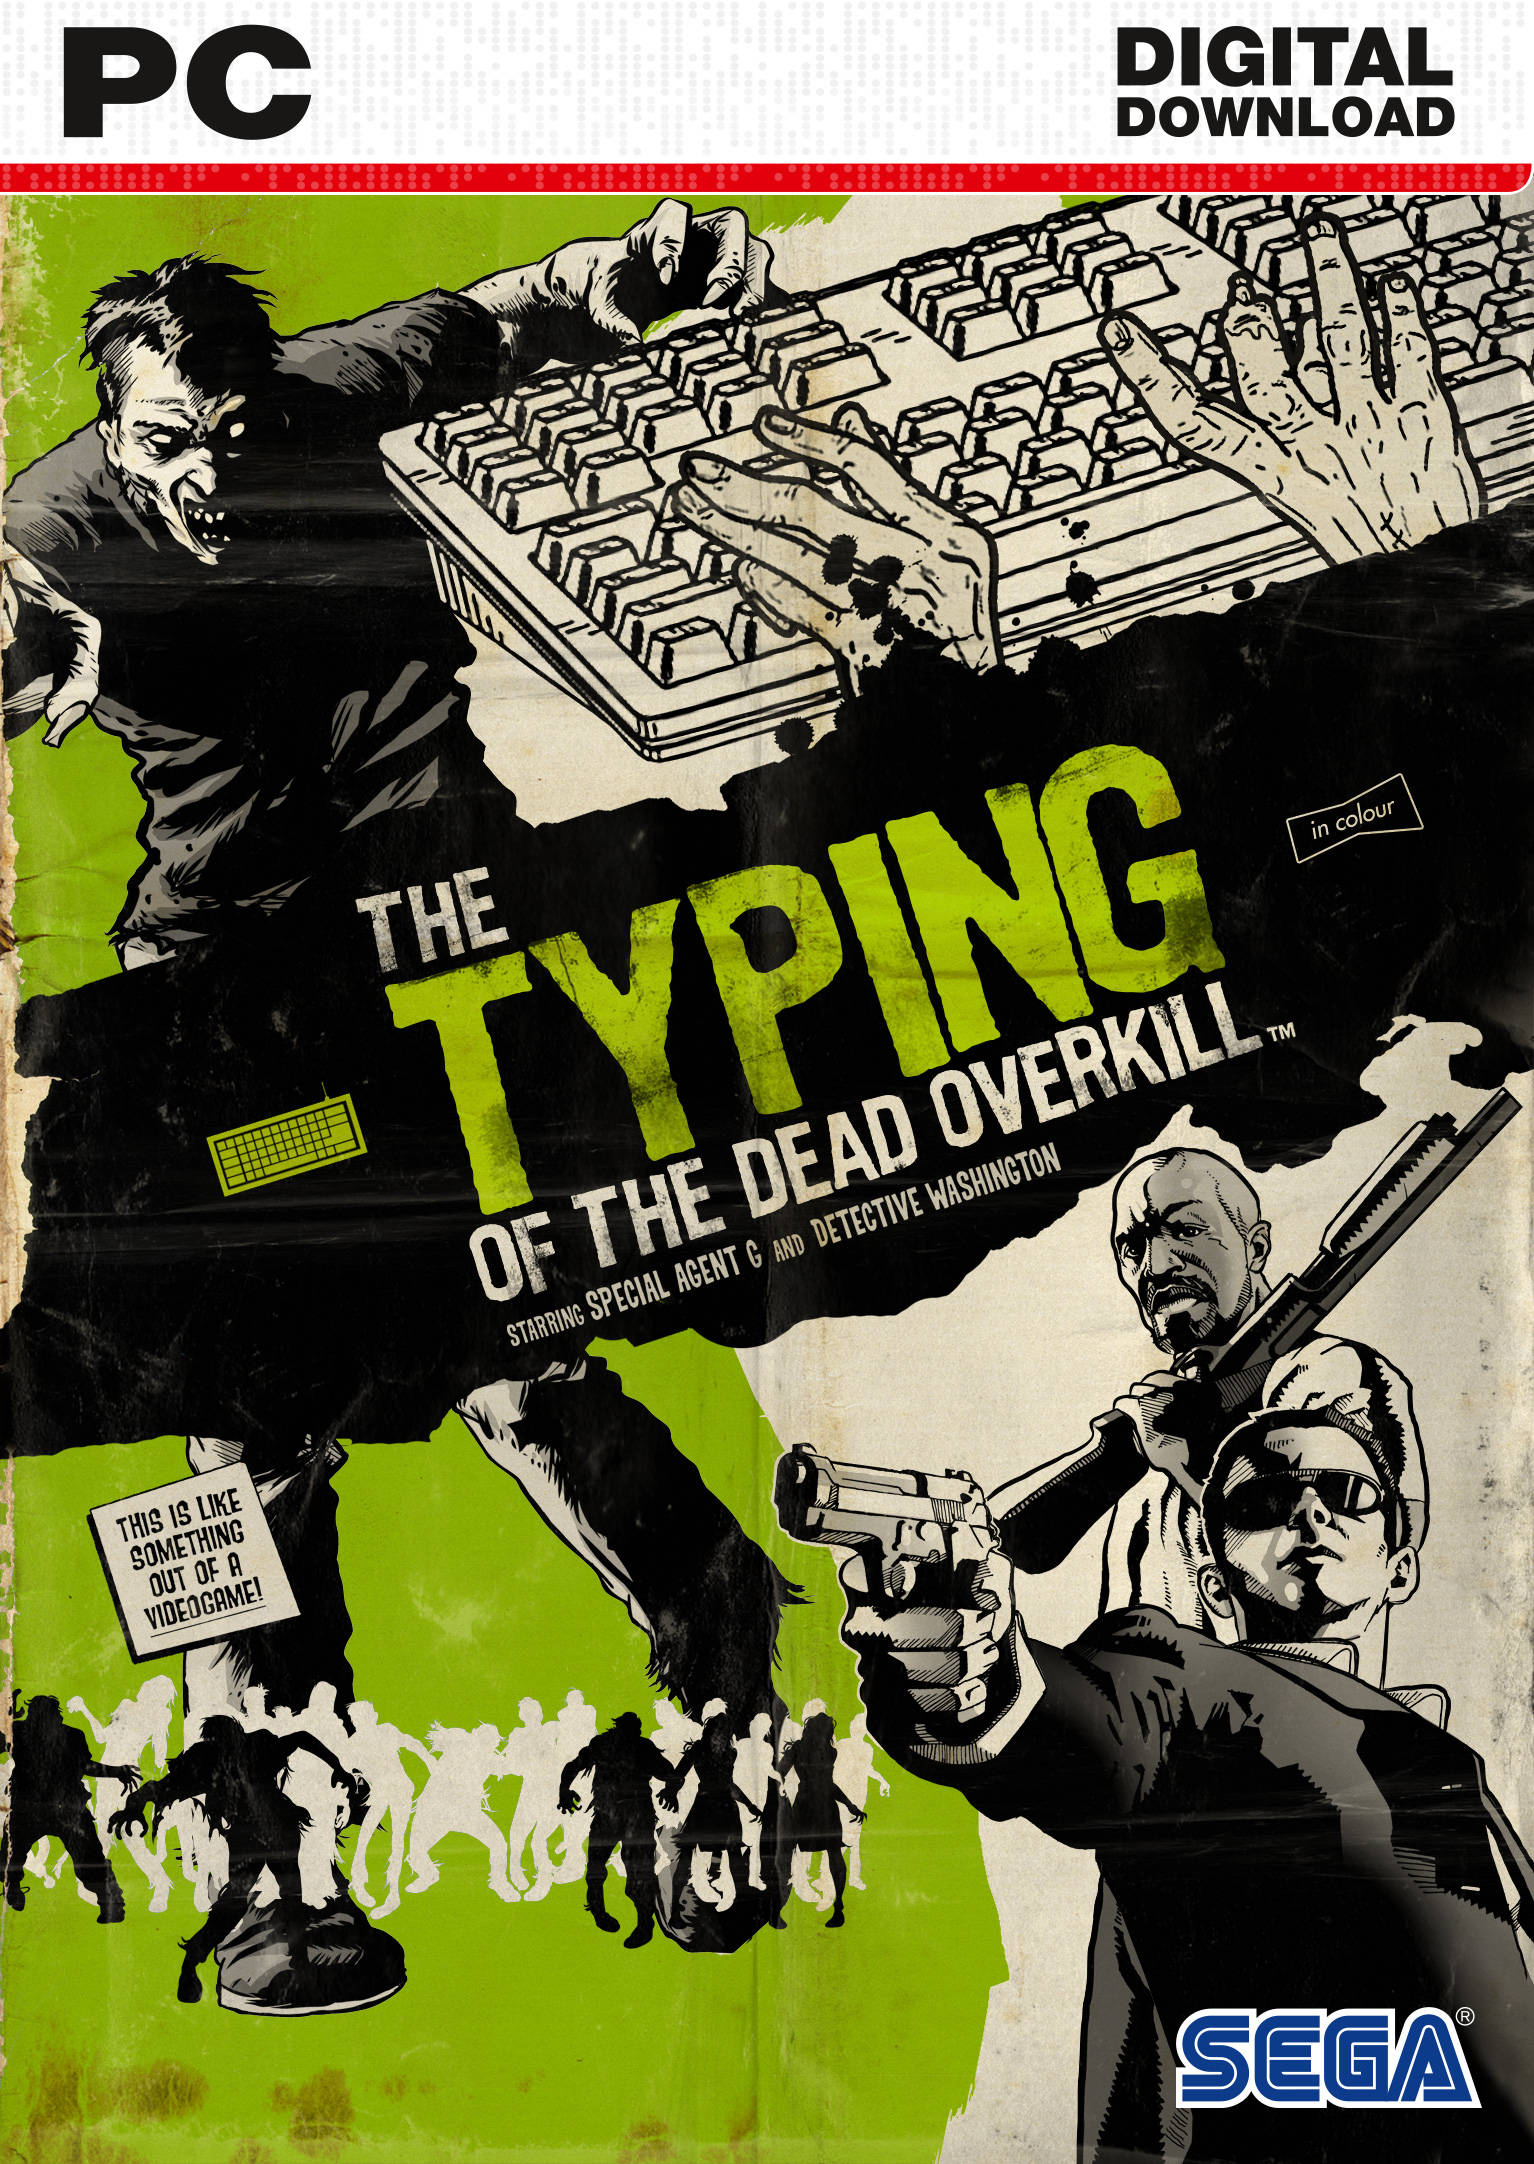 The Typing of the Dead: Overkill | The Wiki of the Dead | Fandom